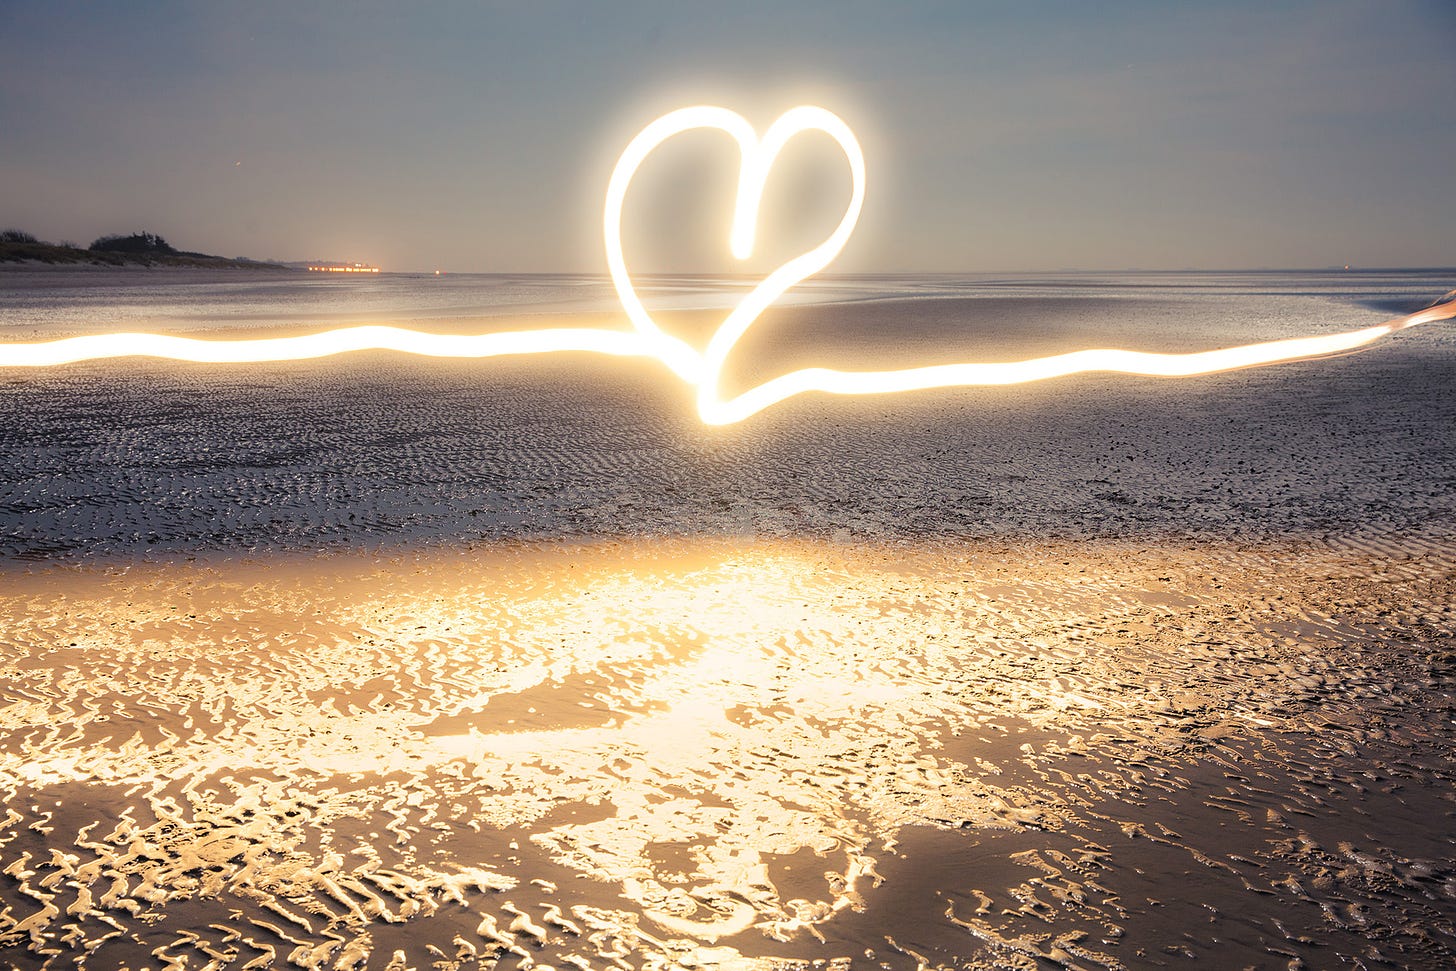 A glowing heart drawn with flashlight at blue hour on the beach near the water at low tide